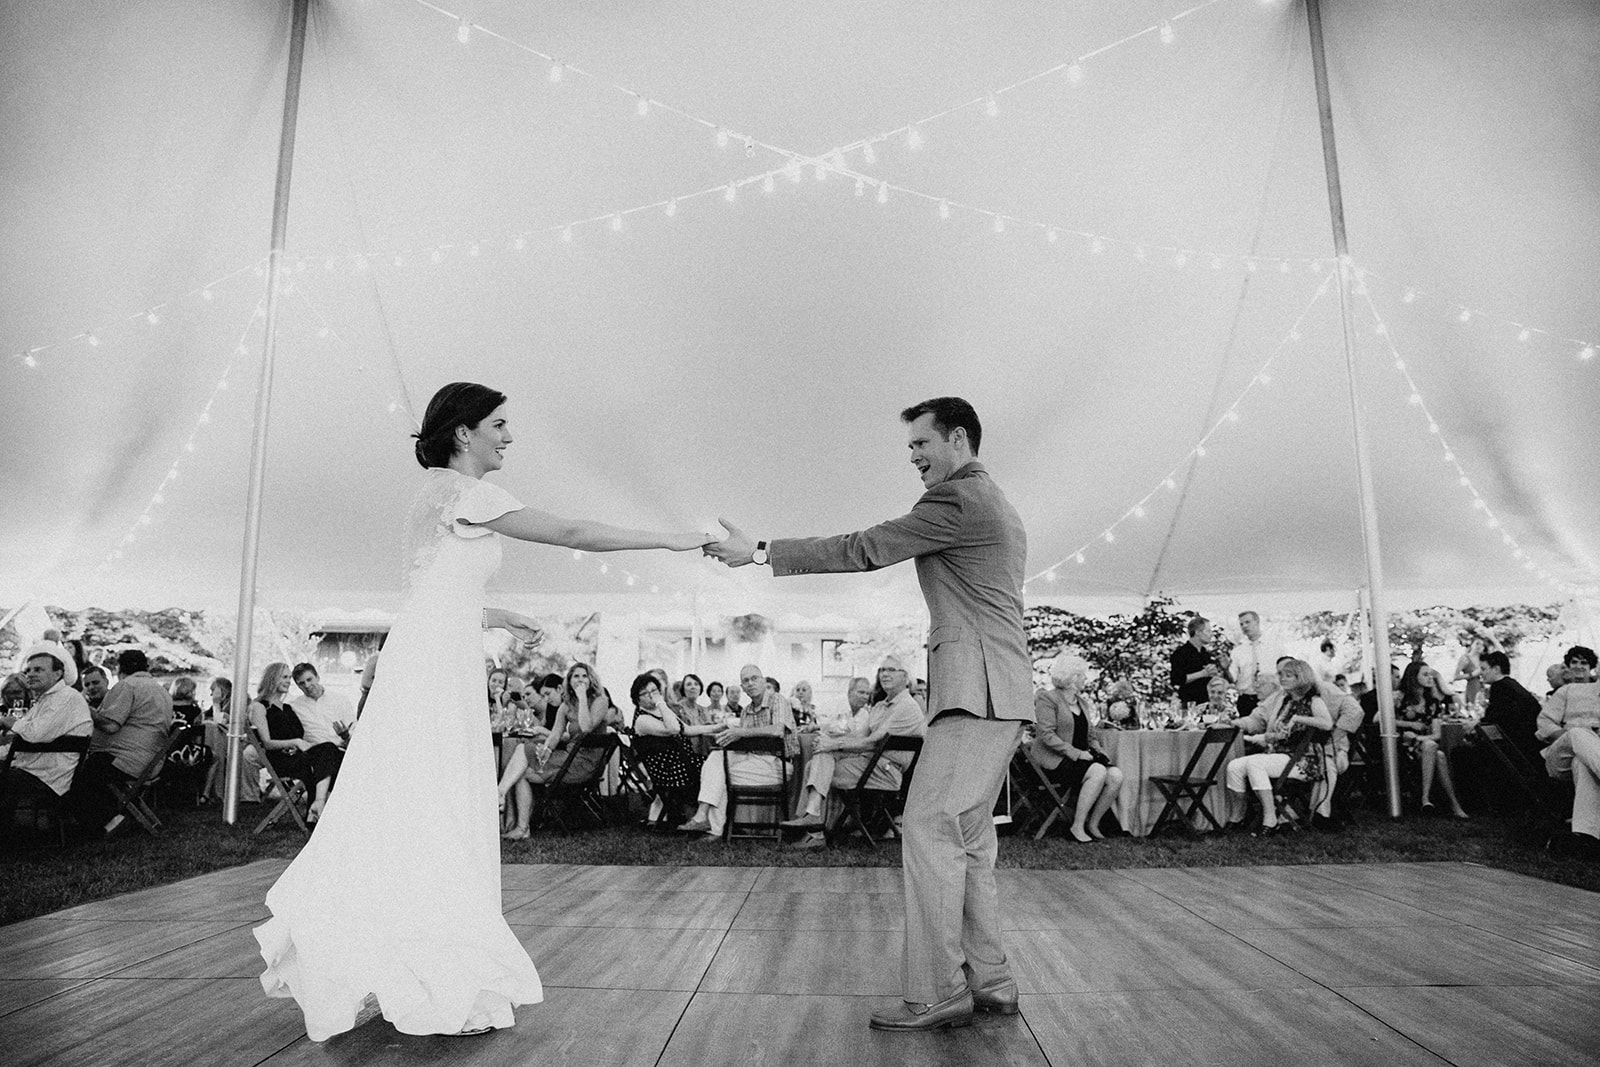 A bride and groom share their first dance under a tented wedding reception in the backyard of her childhood home